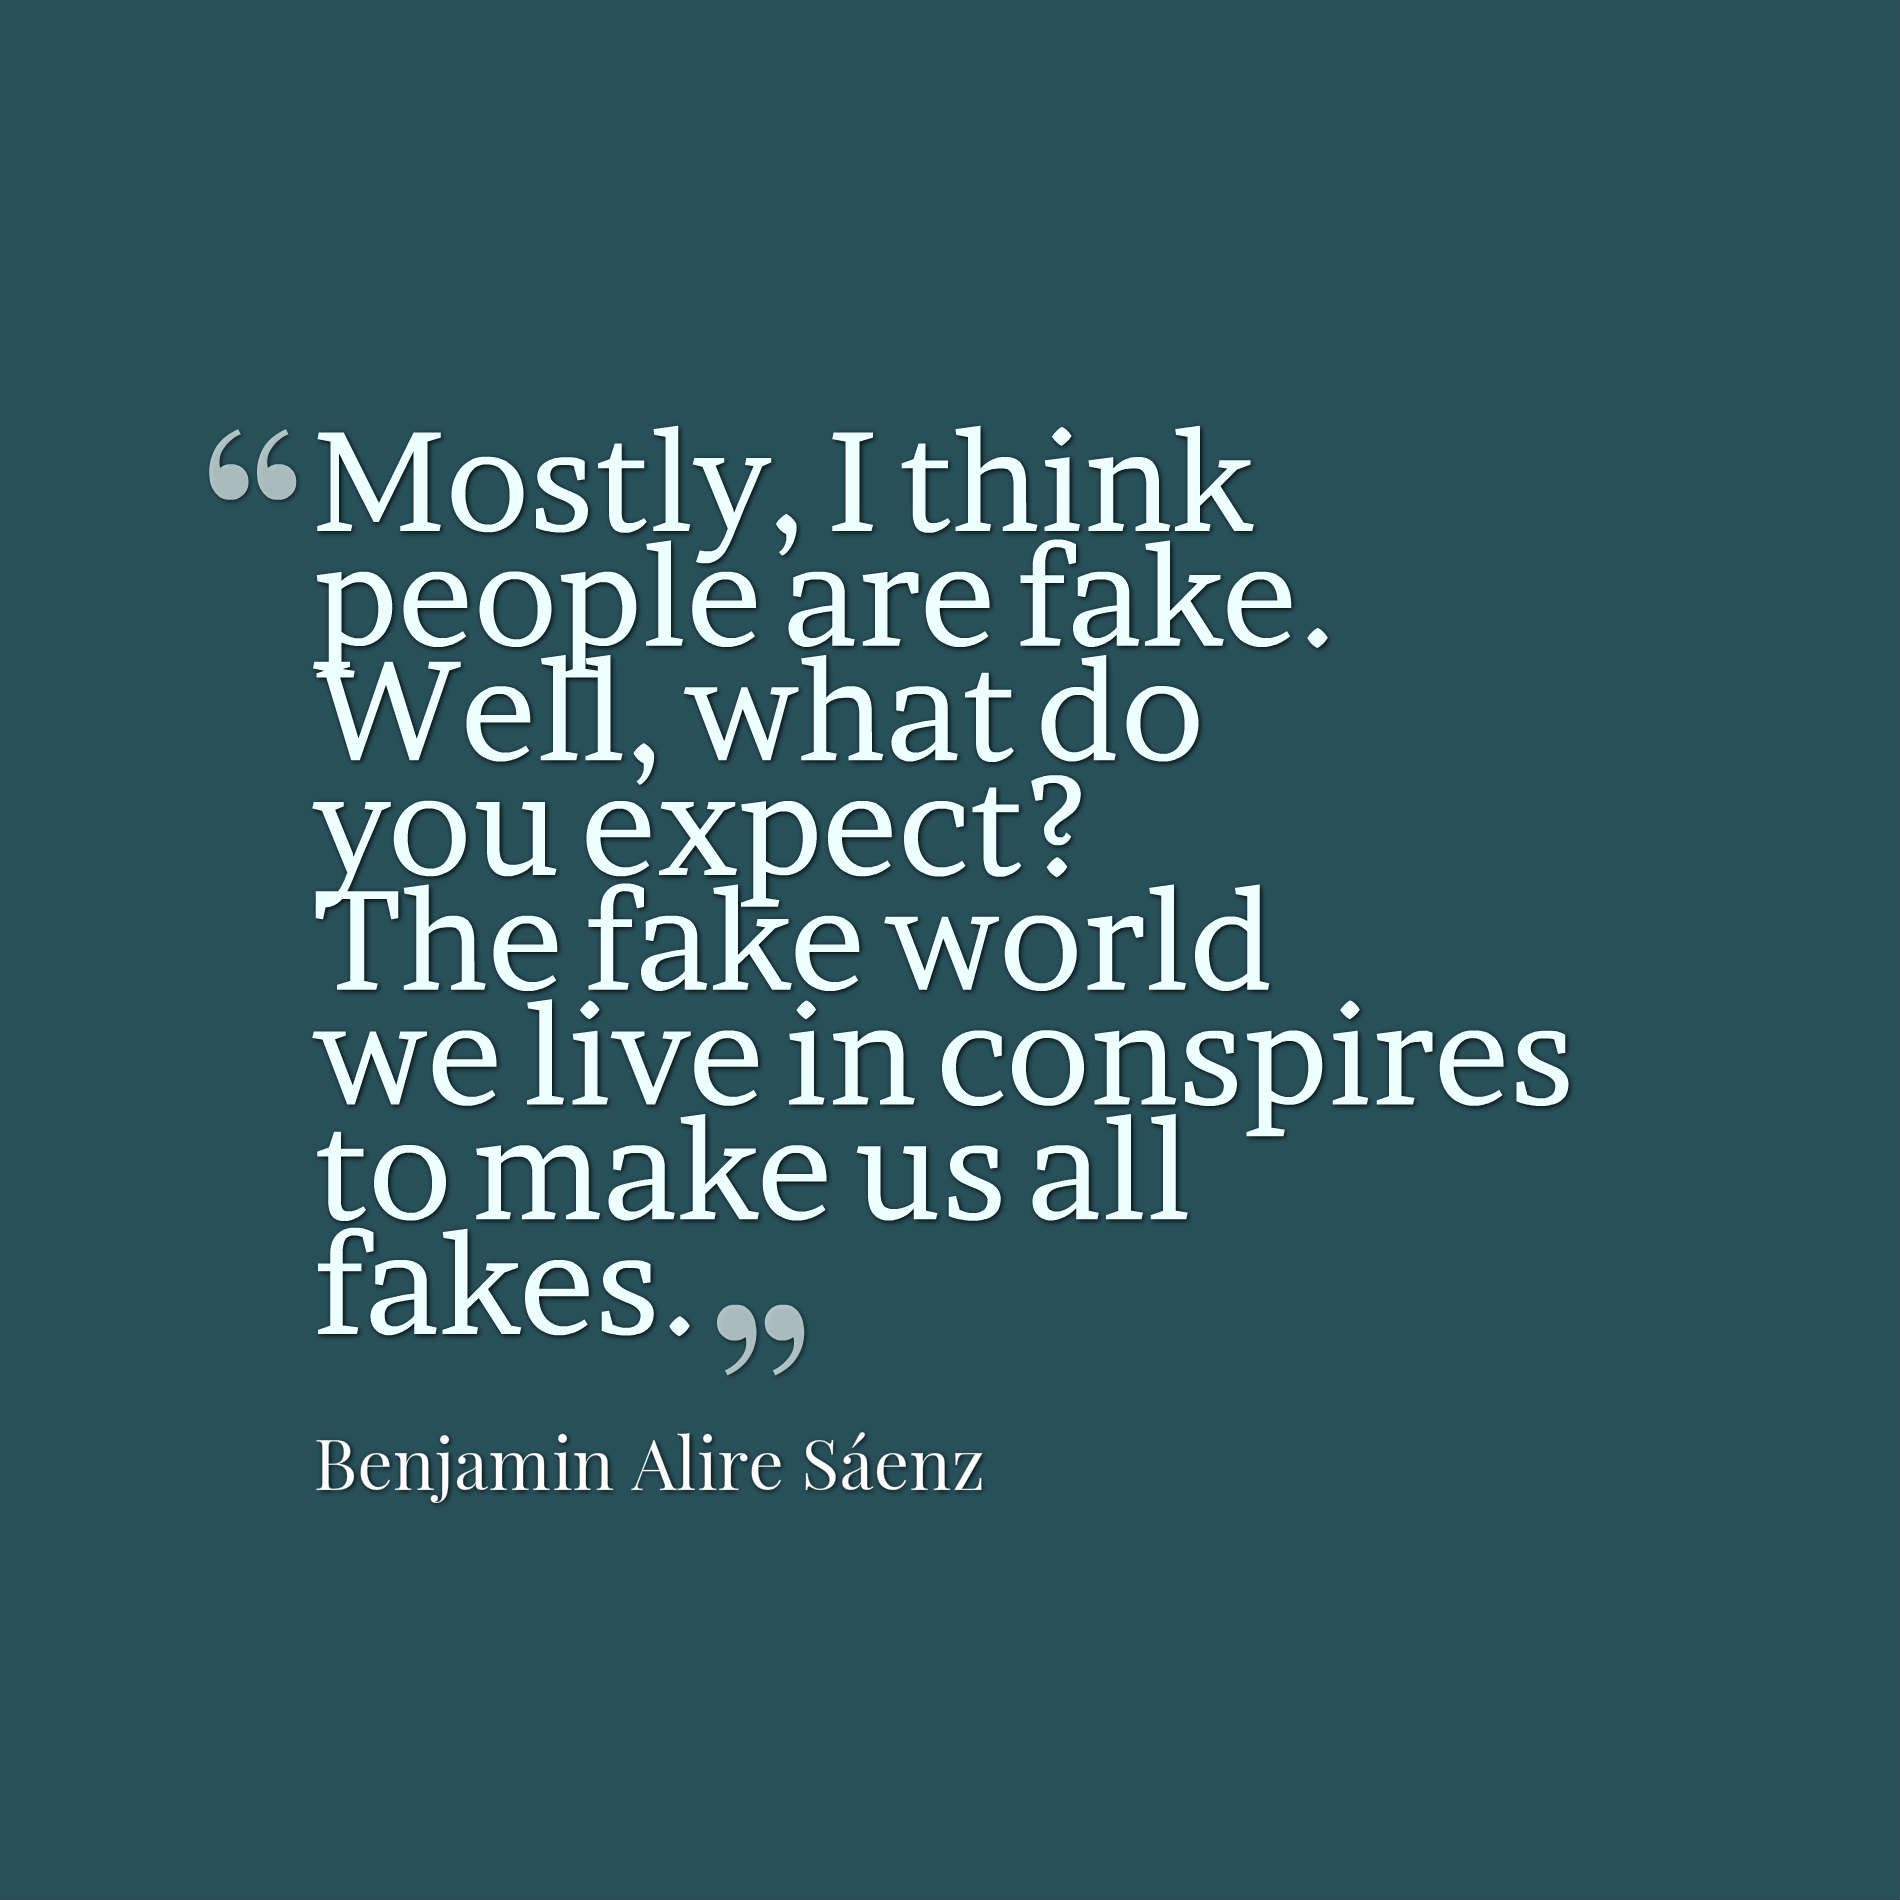 Mostly, I think people are fake. Well, what do you expect? The fake world we live in conspires to make us all fakes.